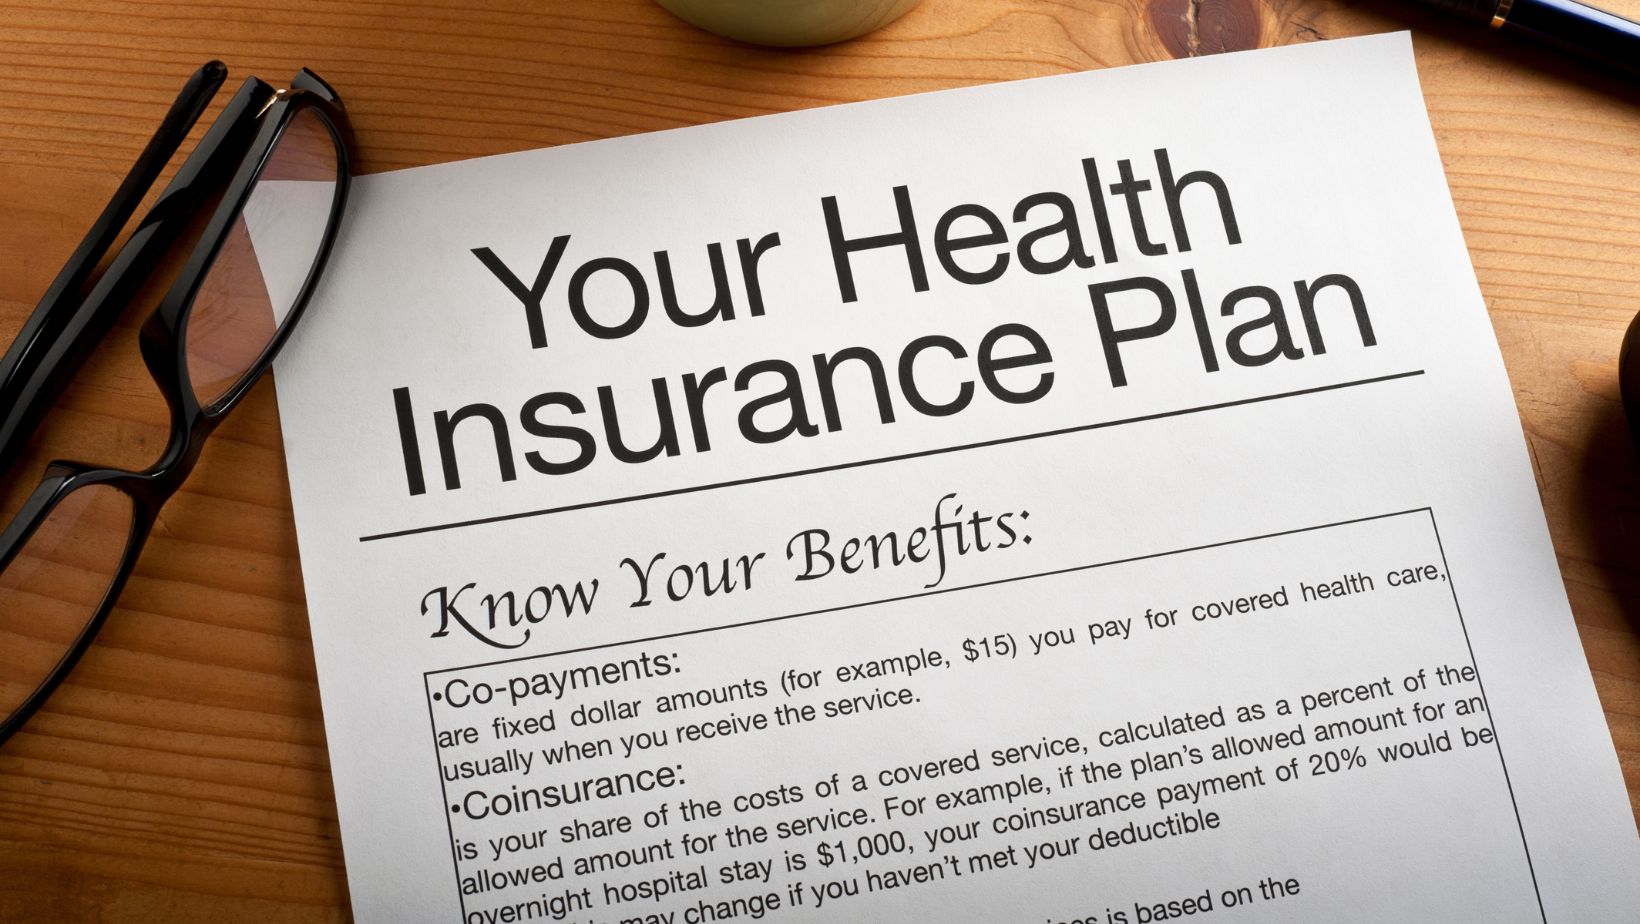 credit accident and health plans are designed to